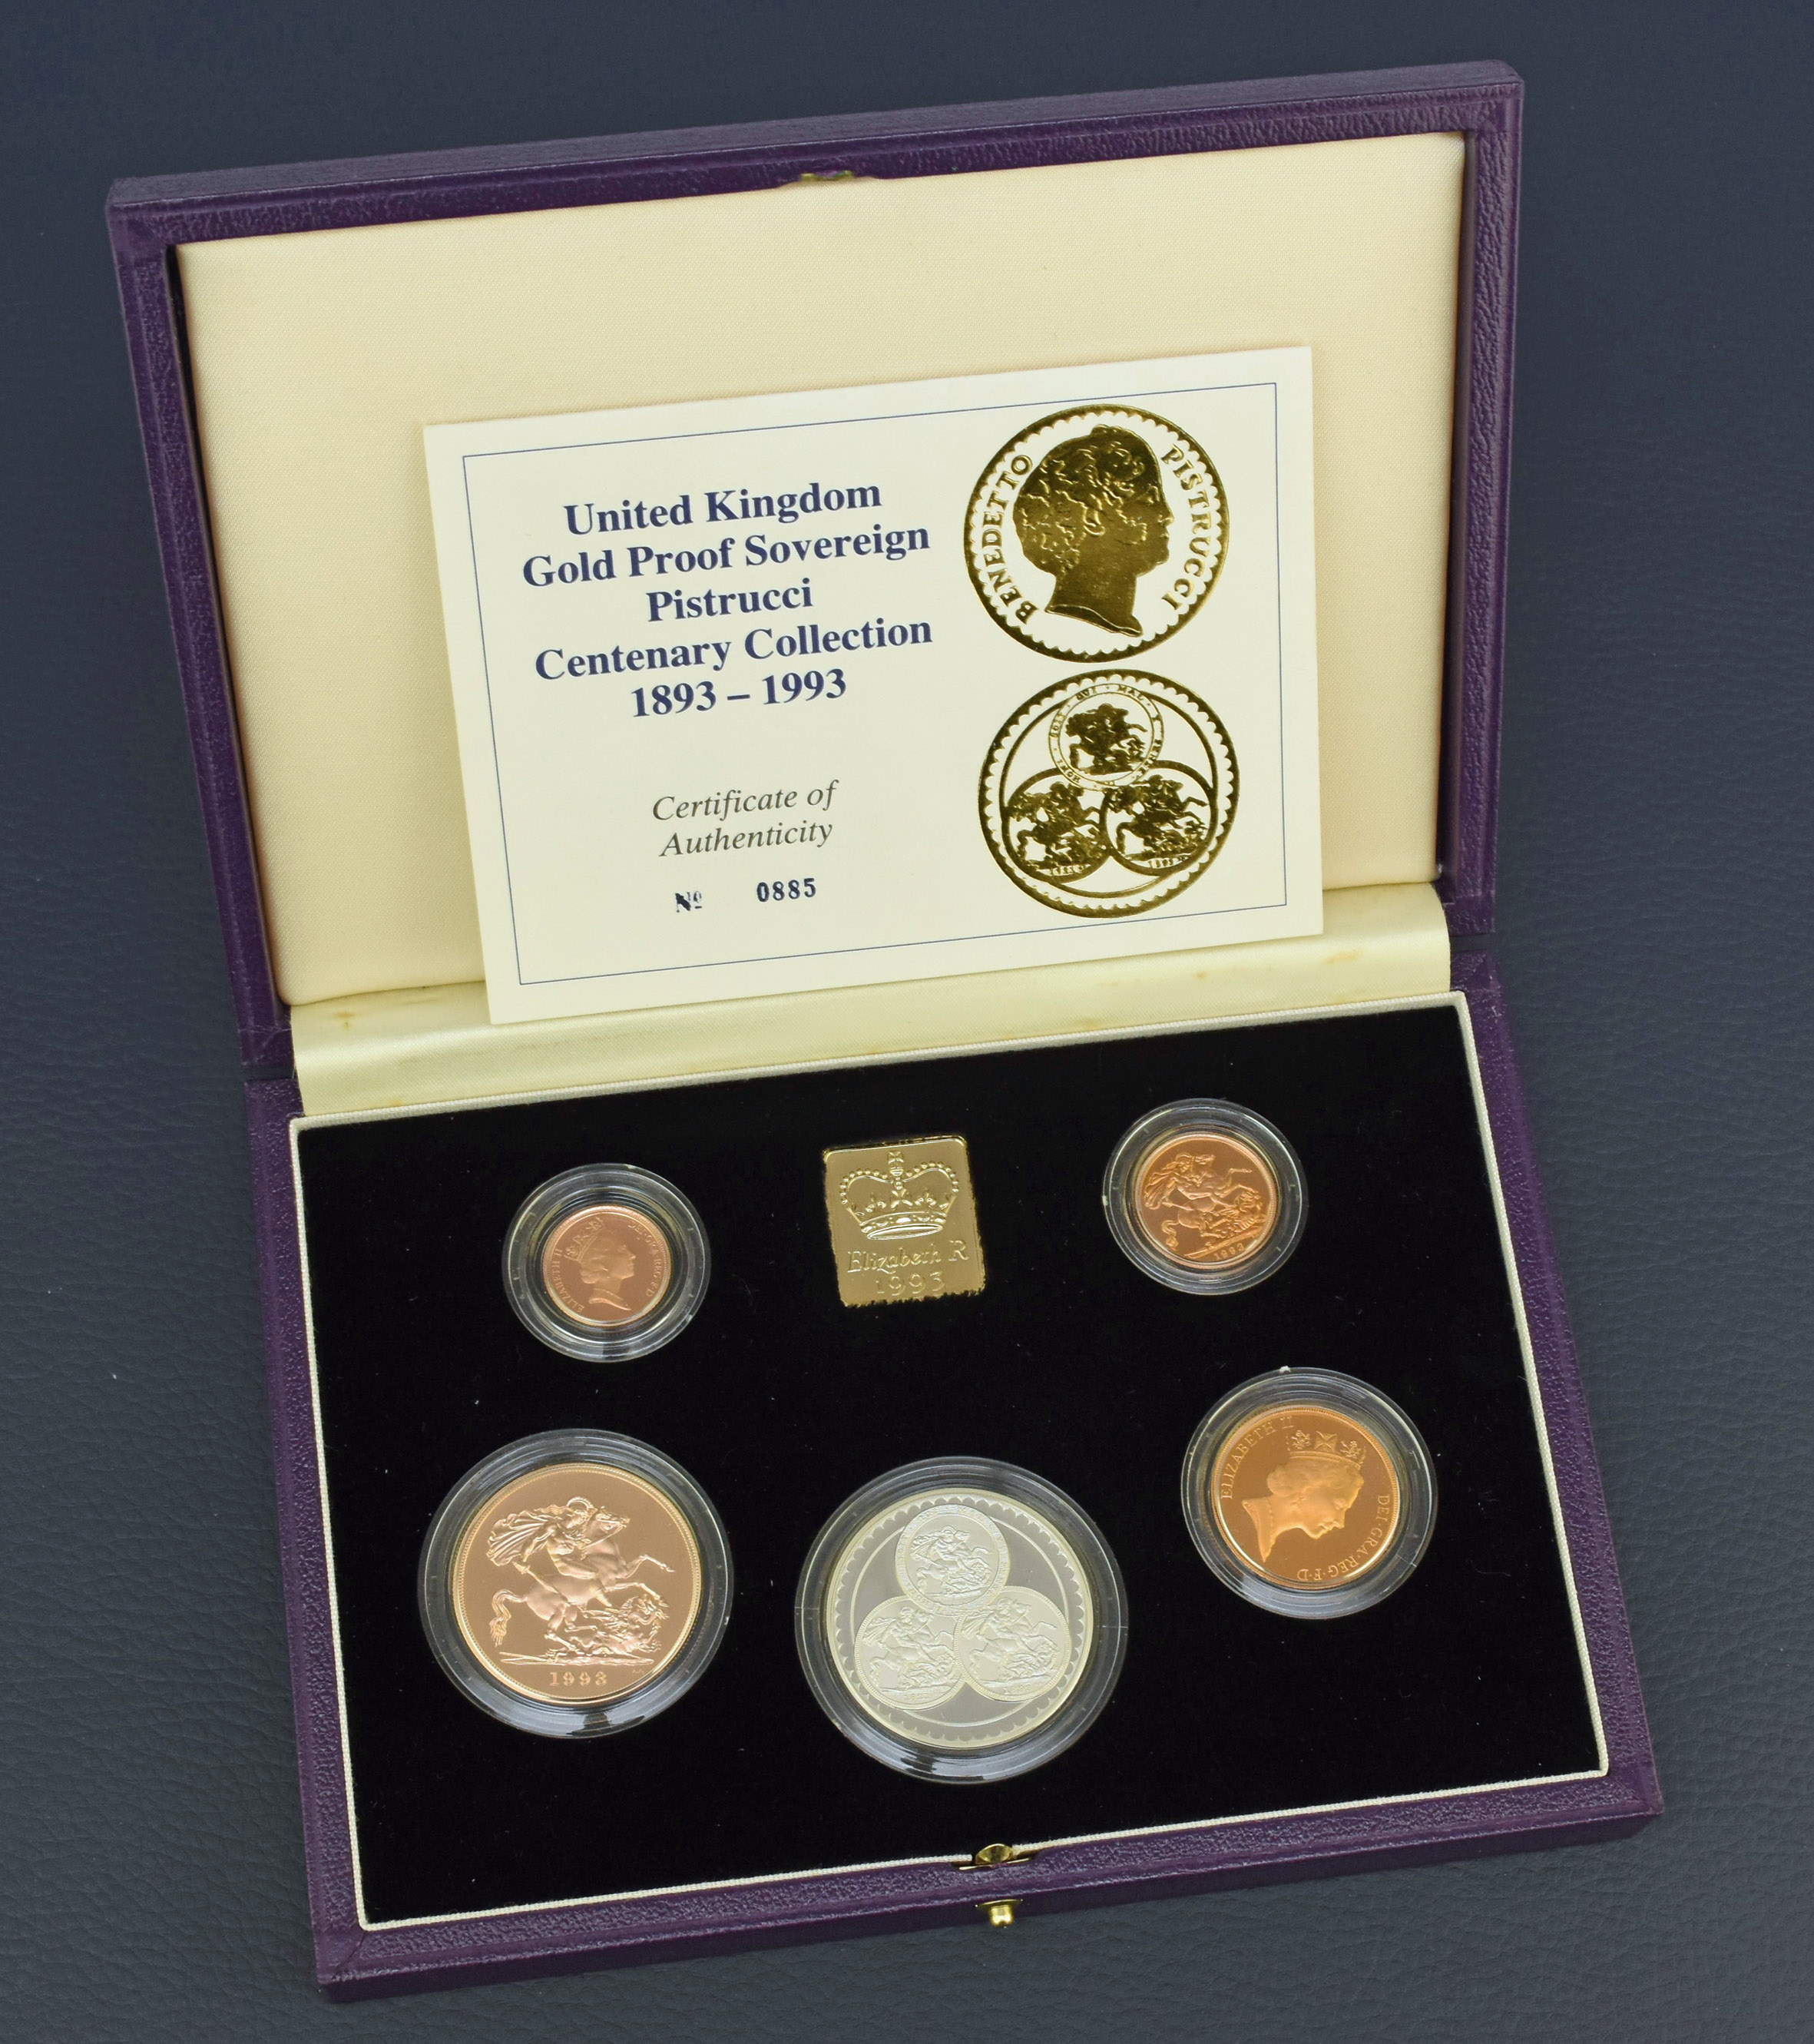 One of the sets of mint condition gold coins from the collection. Halls Fine Art